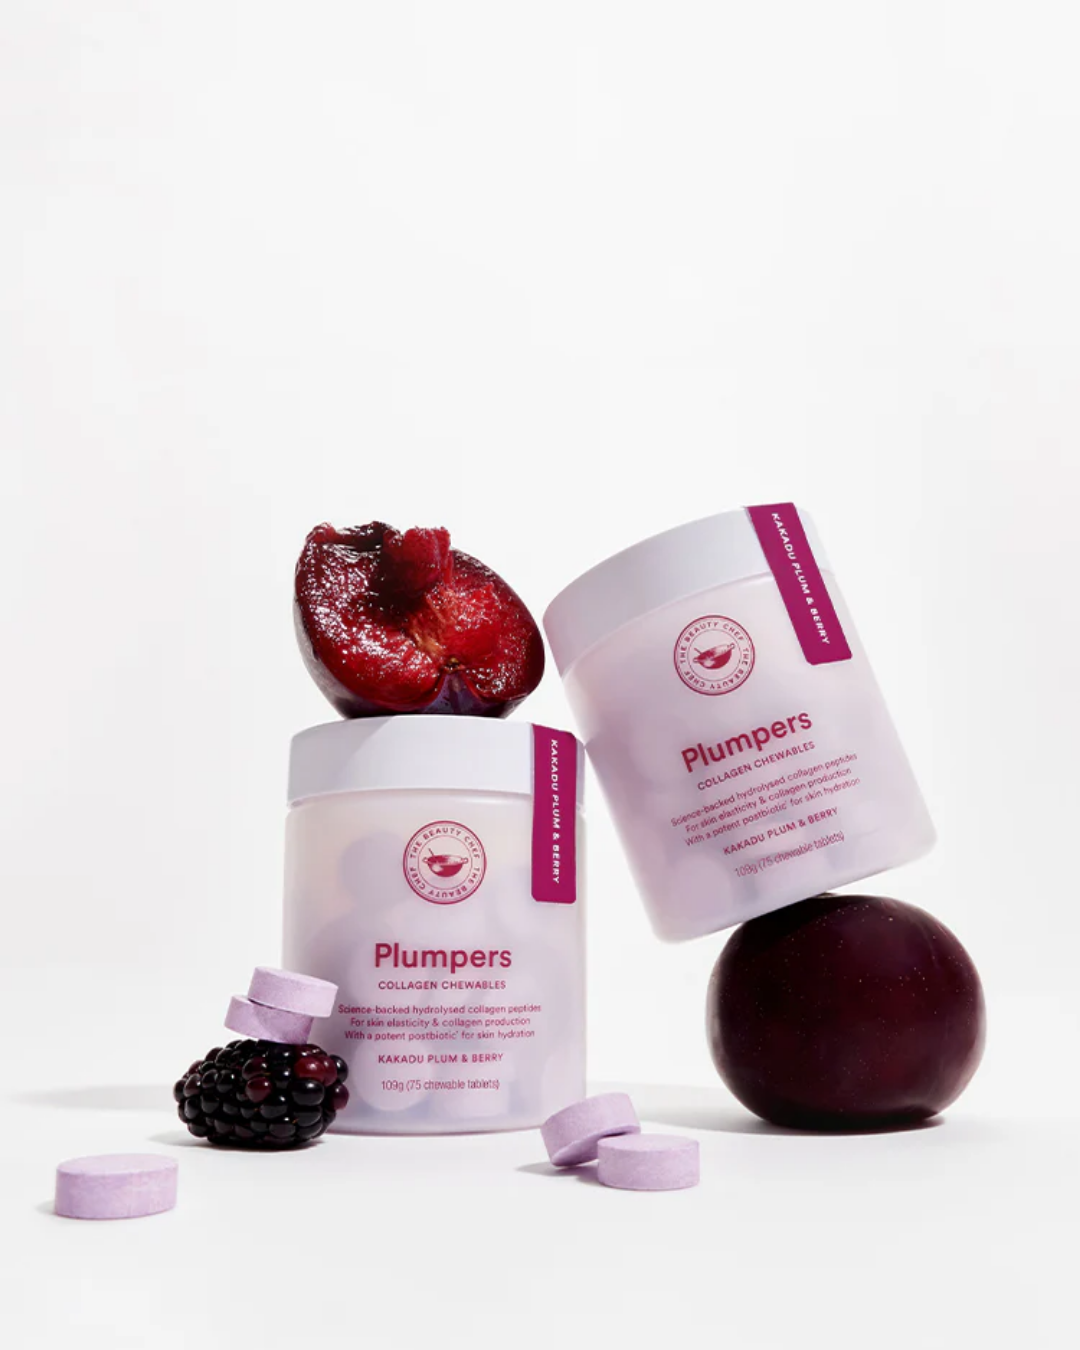 Plumpers™  - Kakadu Plum & Berry Supplements by The Beauty Chef - Prae Wellness